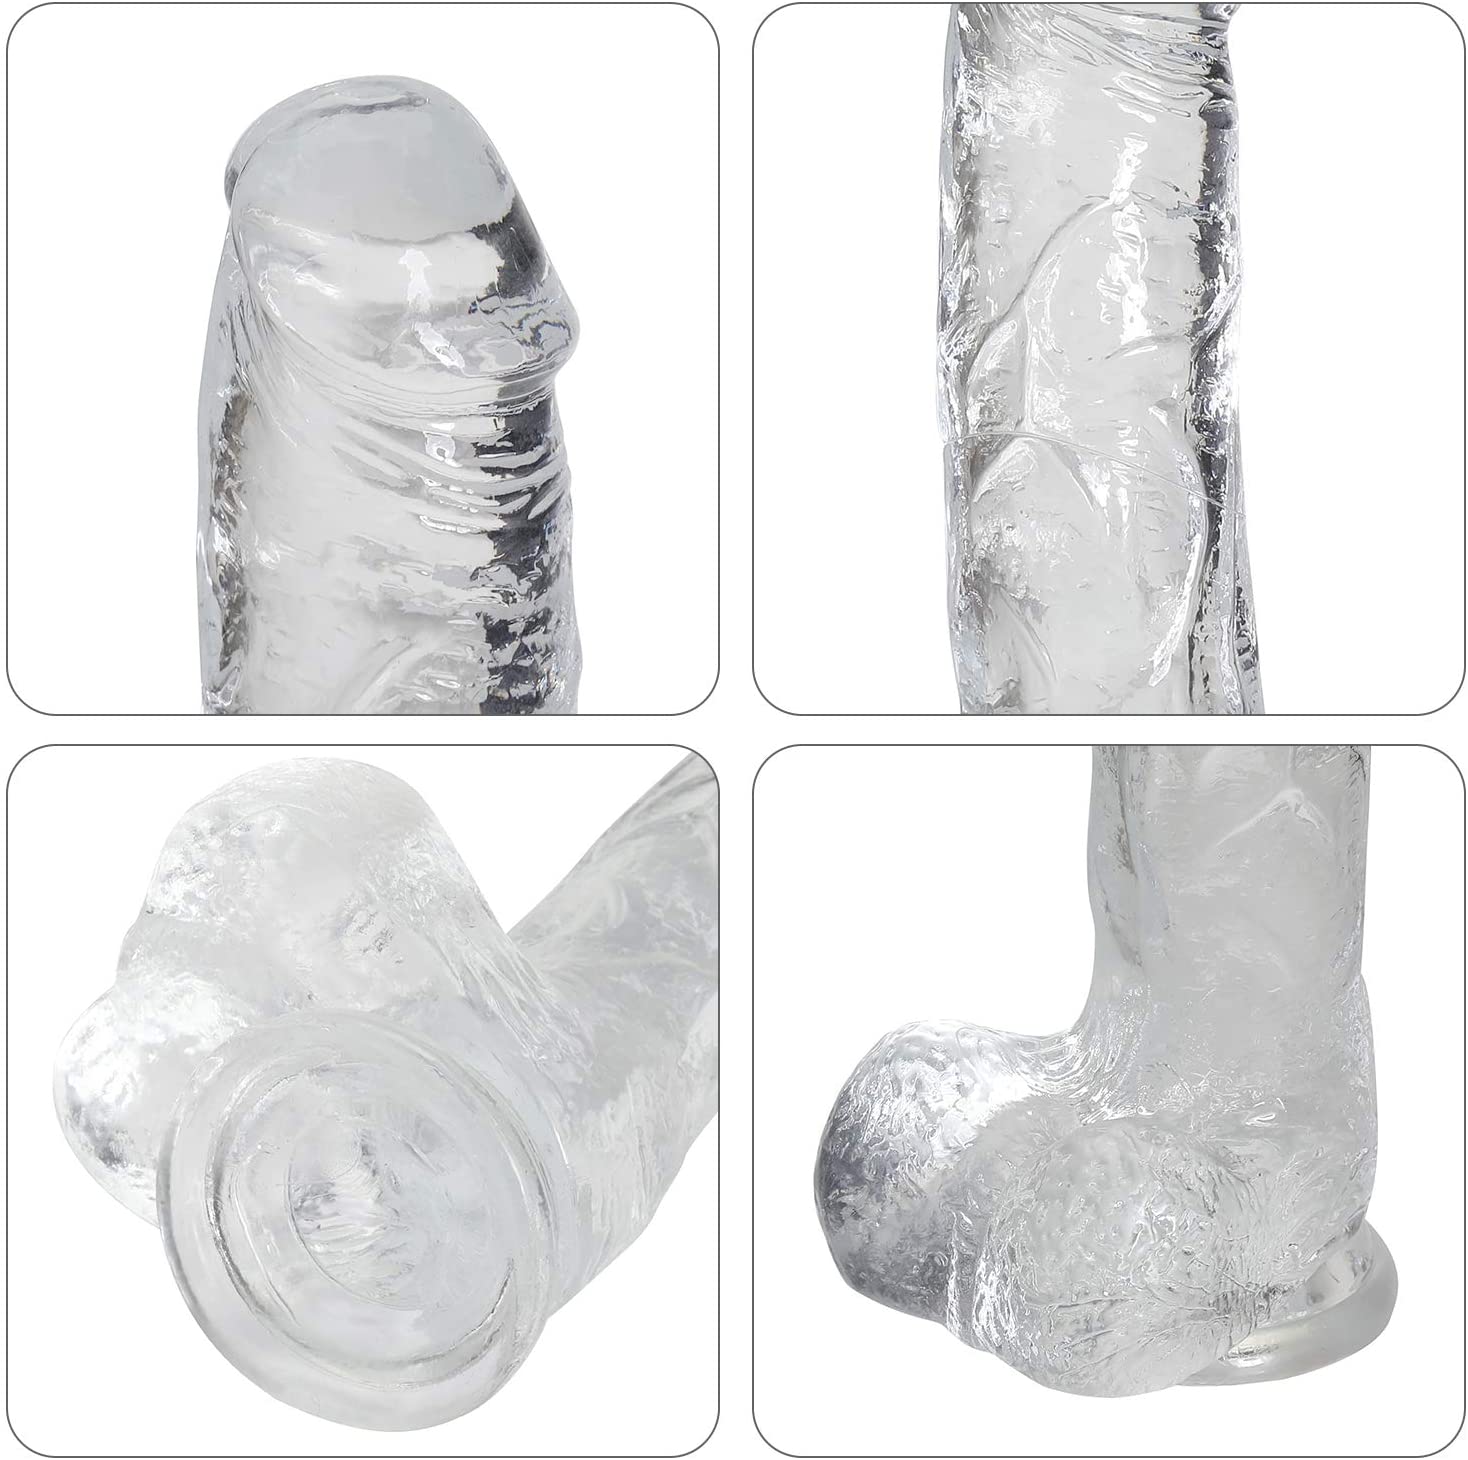 Realistic Dildos Feels Like Skin, 7.3 Inch Clear Dildo with Suction Cup for Hands-Free Play, Body-Safe Material and Adult Sex Toys for Women